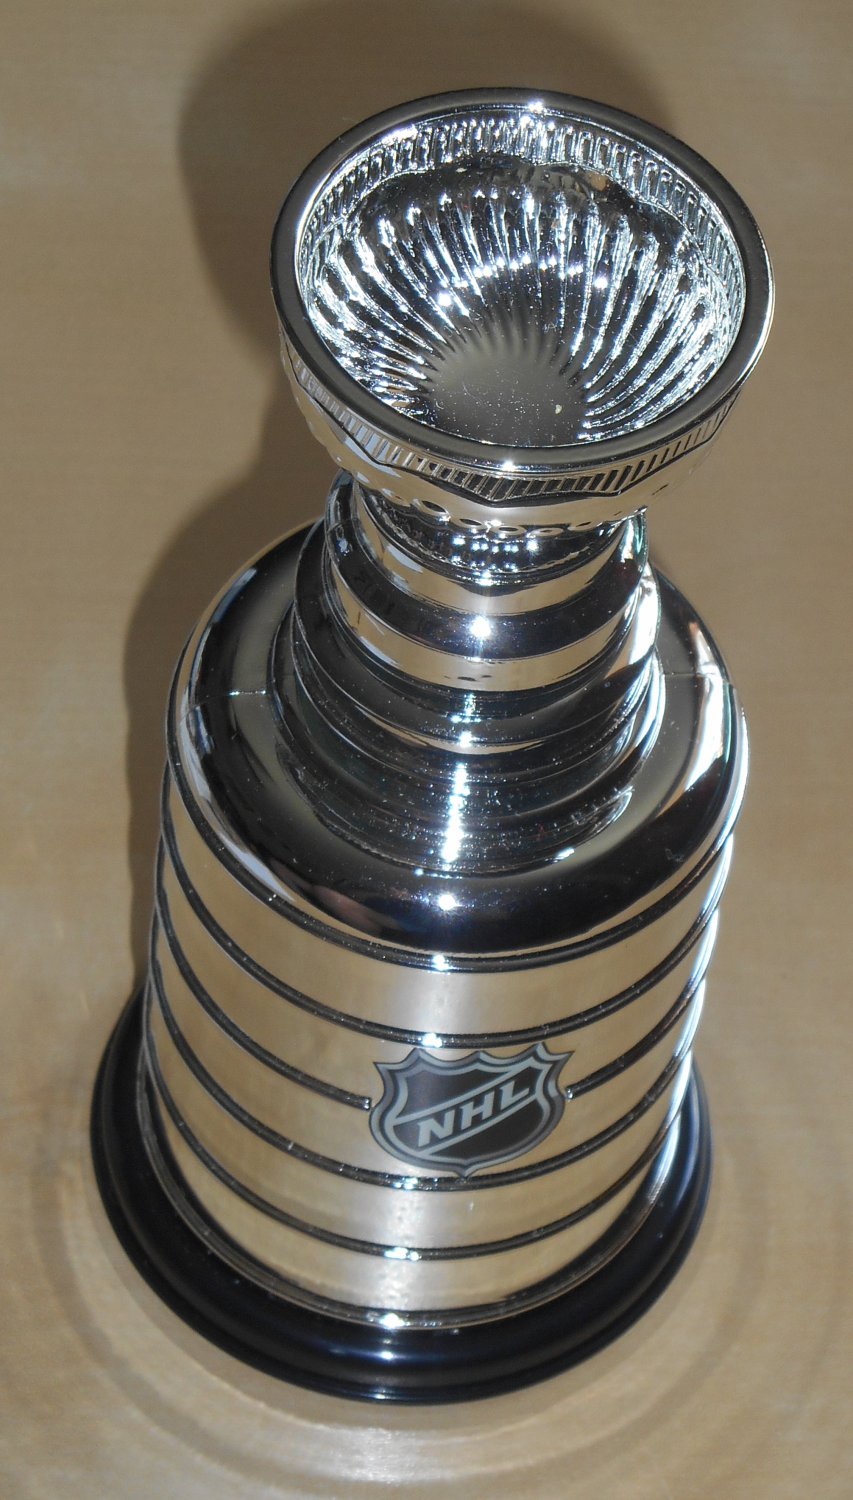 Limited Edition 17 Scale Replica Model Stanley Cup Trophy 2005 2006 Nhl Hockey With Box 